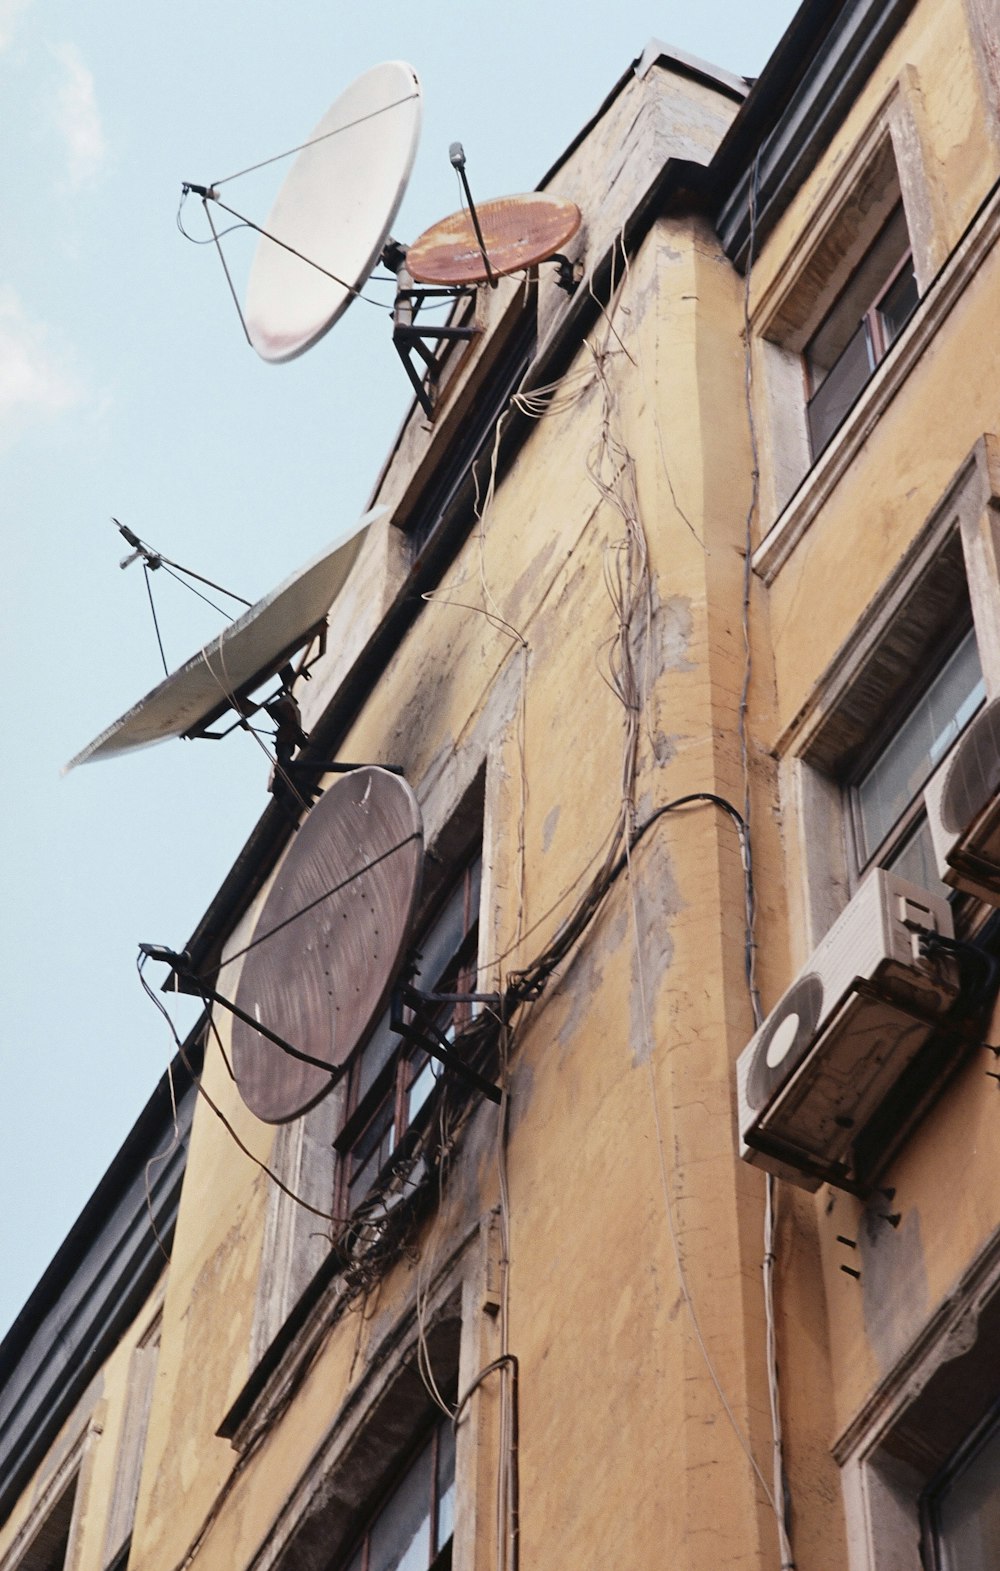 a satellite dish mounted to the side of a building